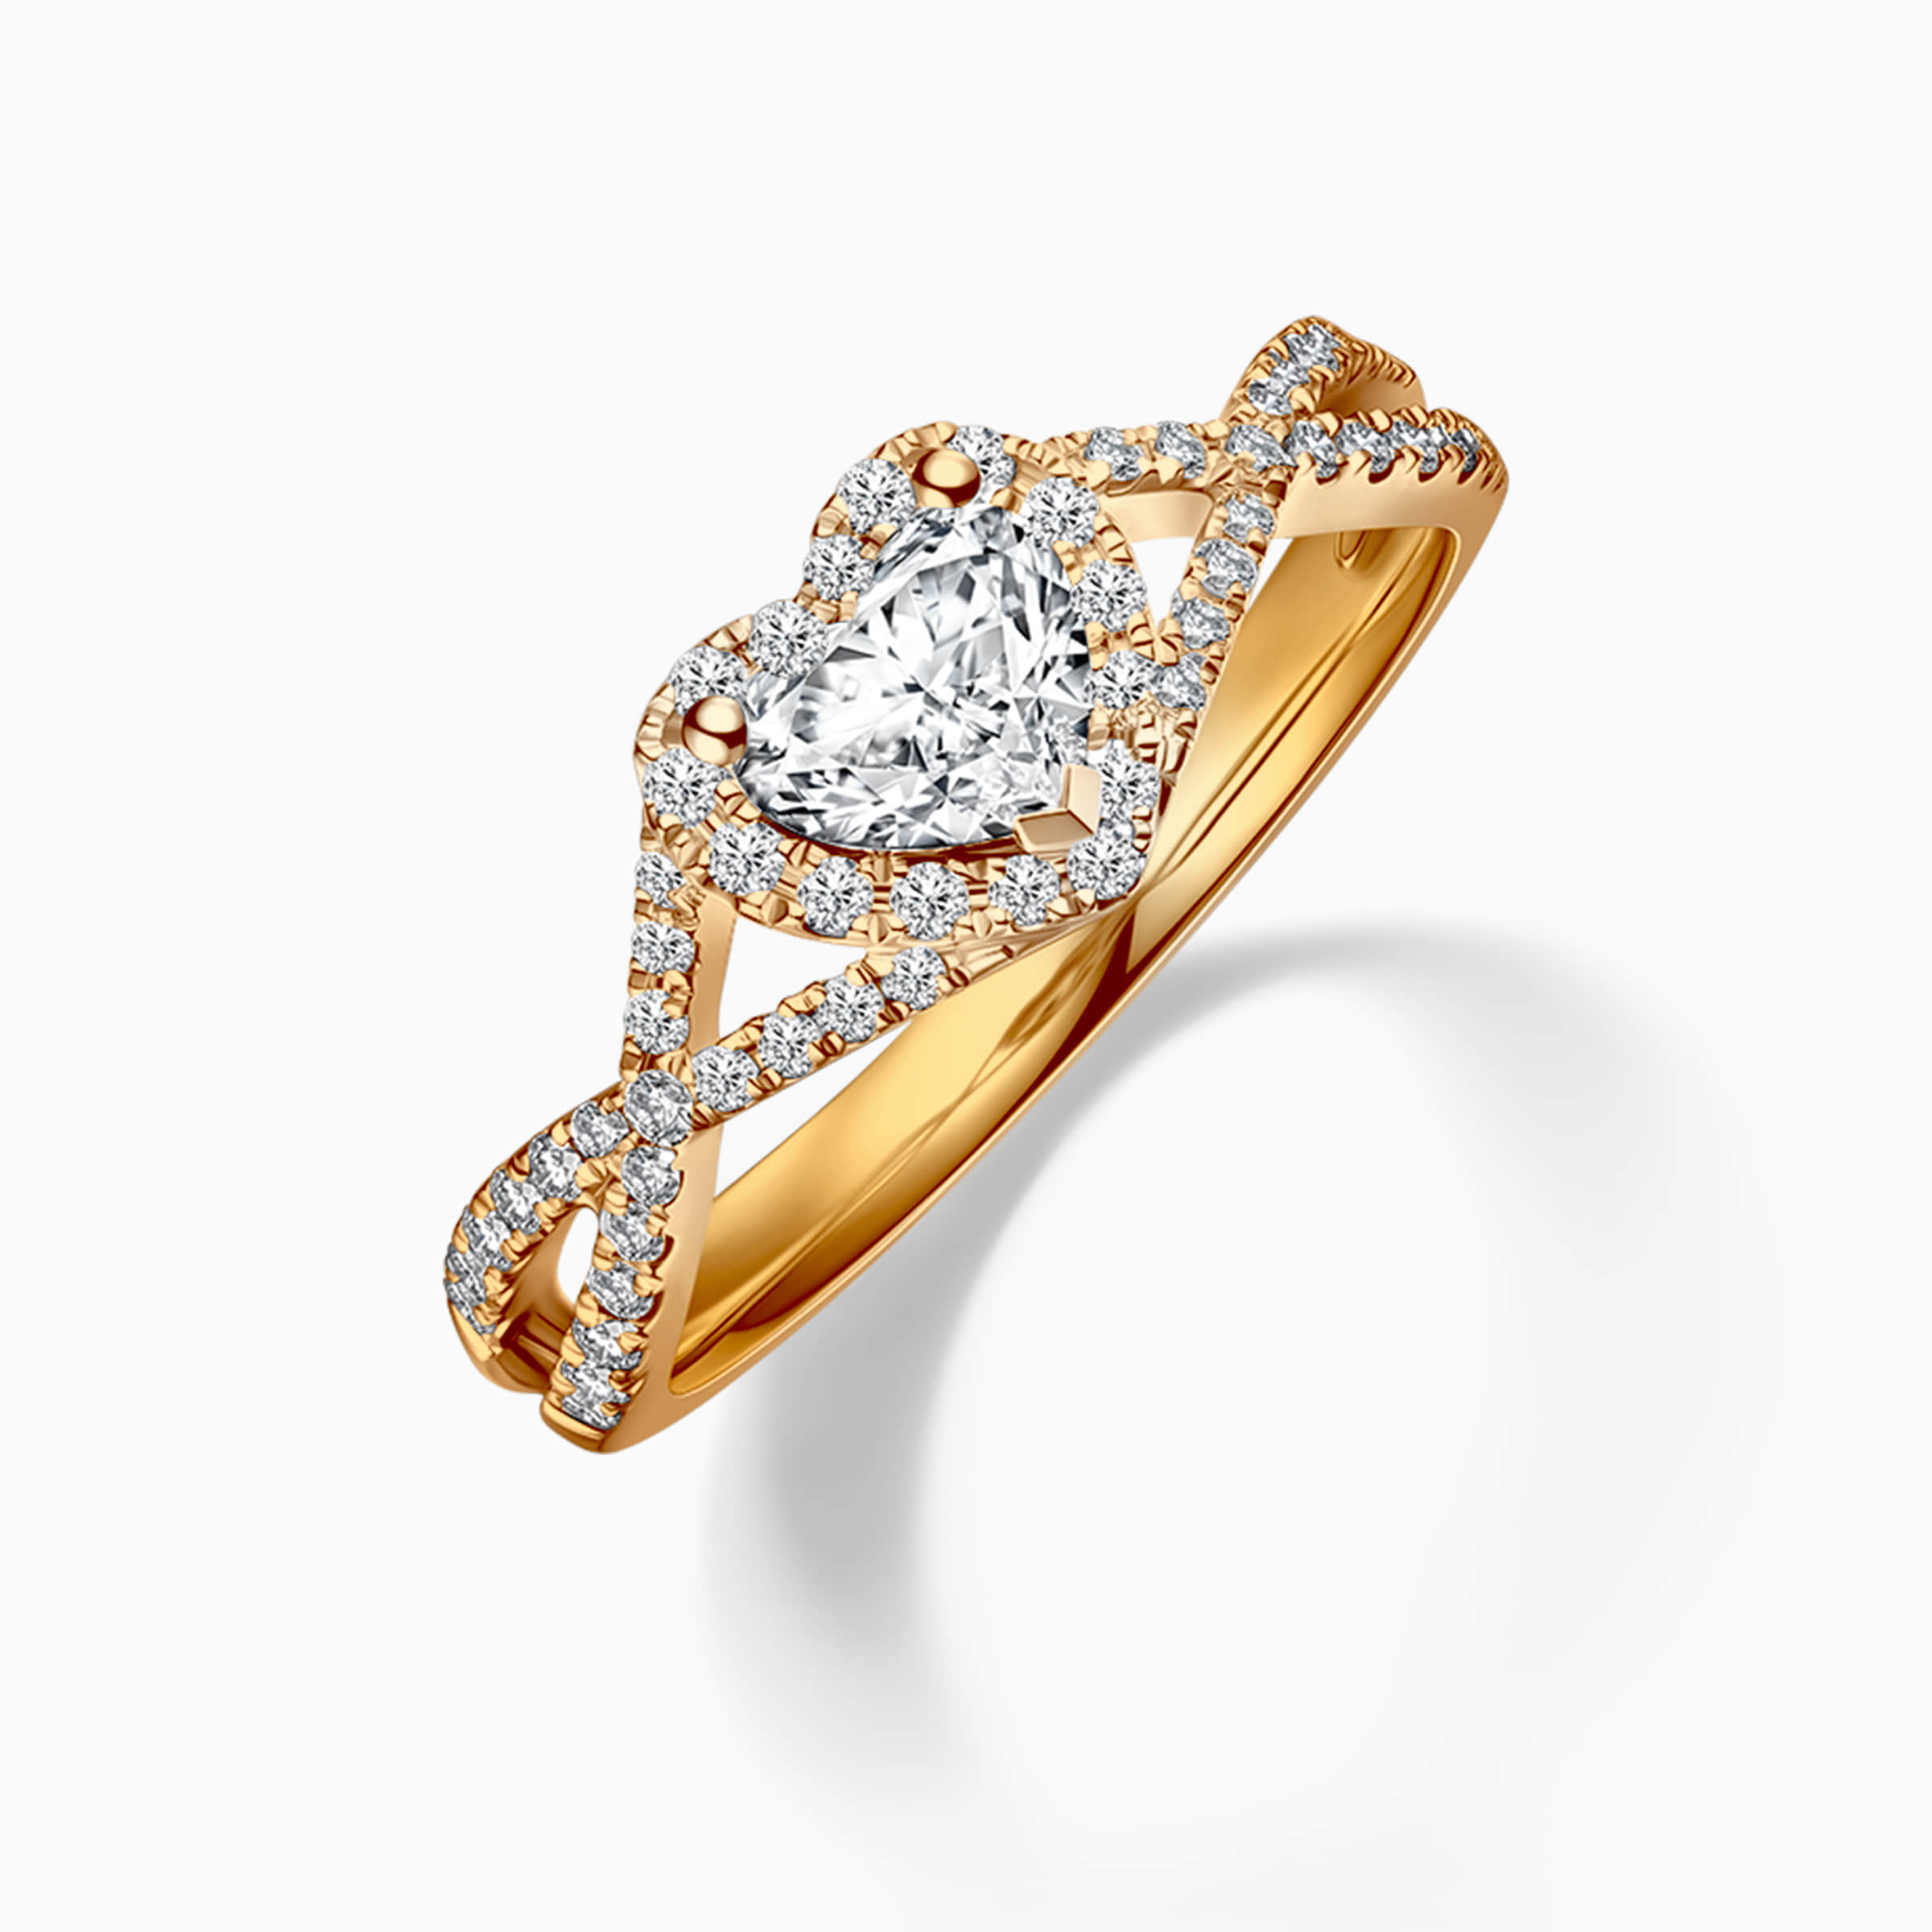 Darry Ring halo diamond engagement ring yellow gold